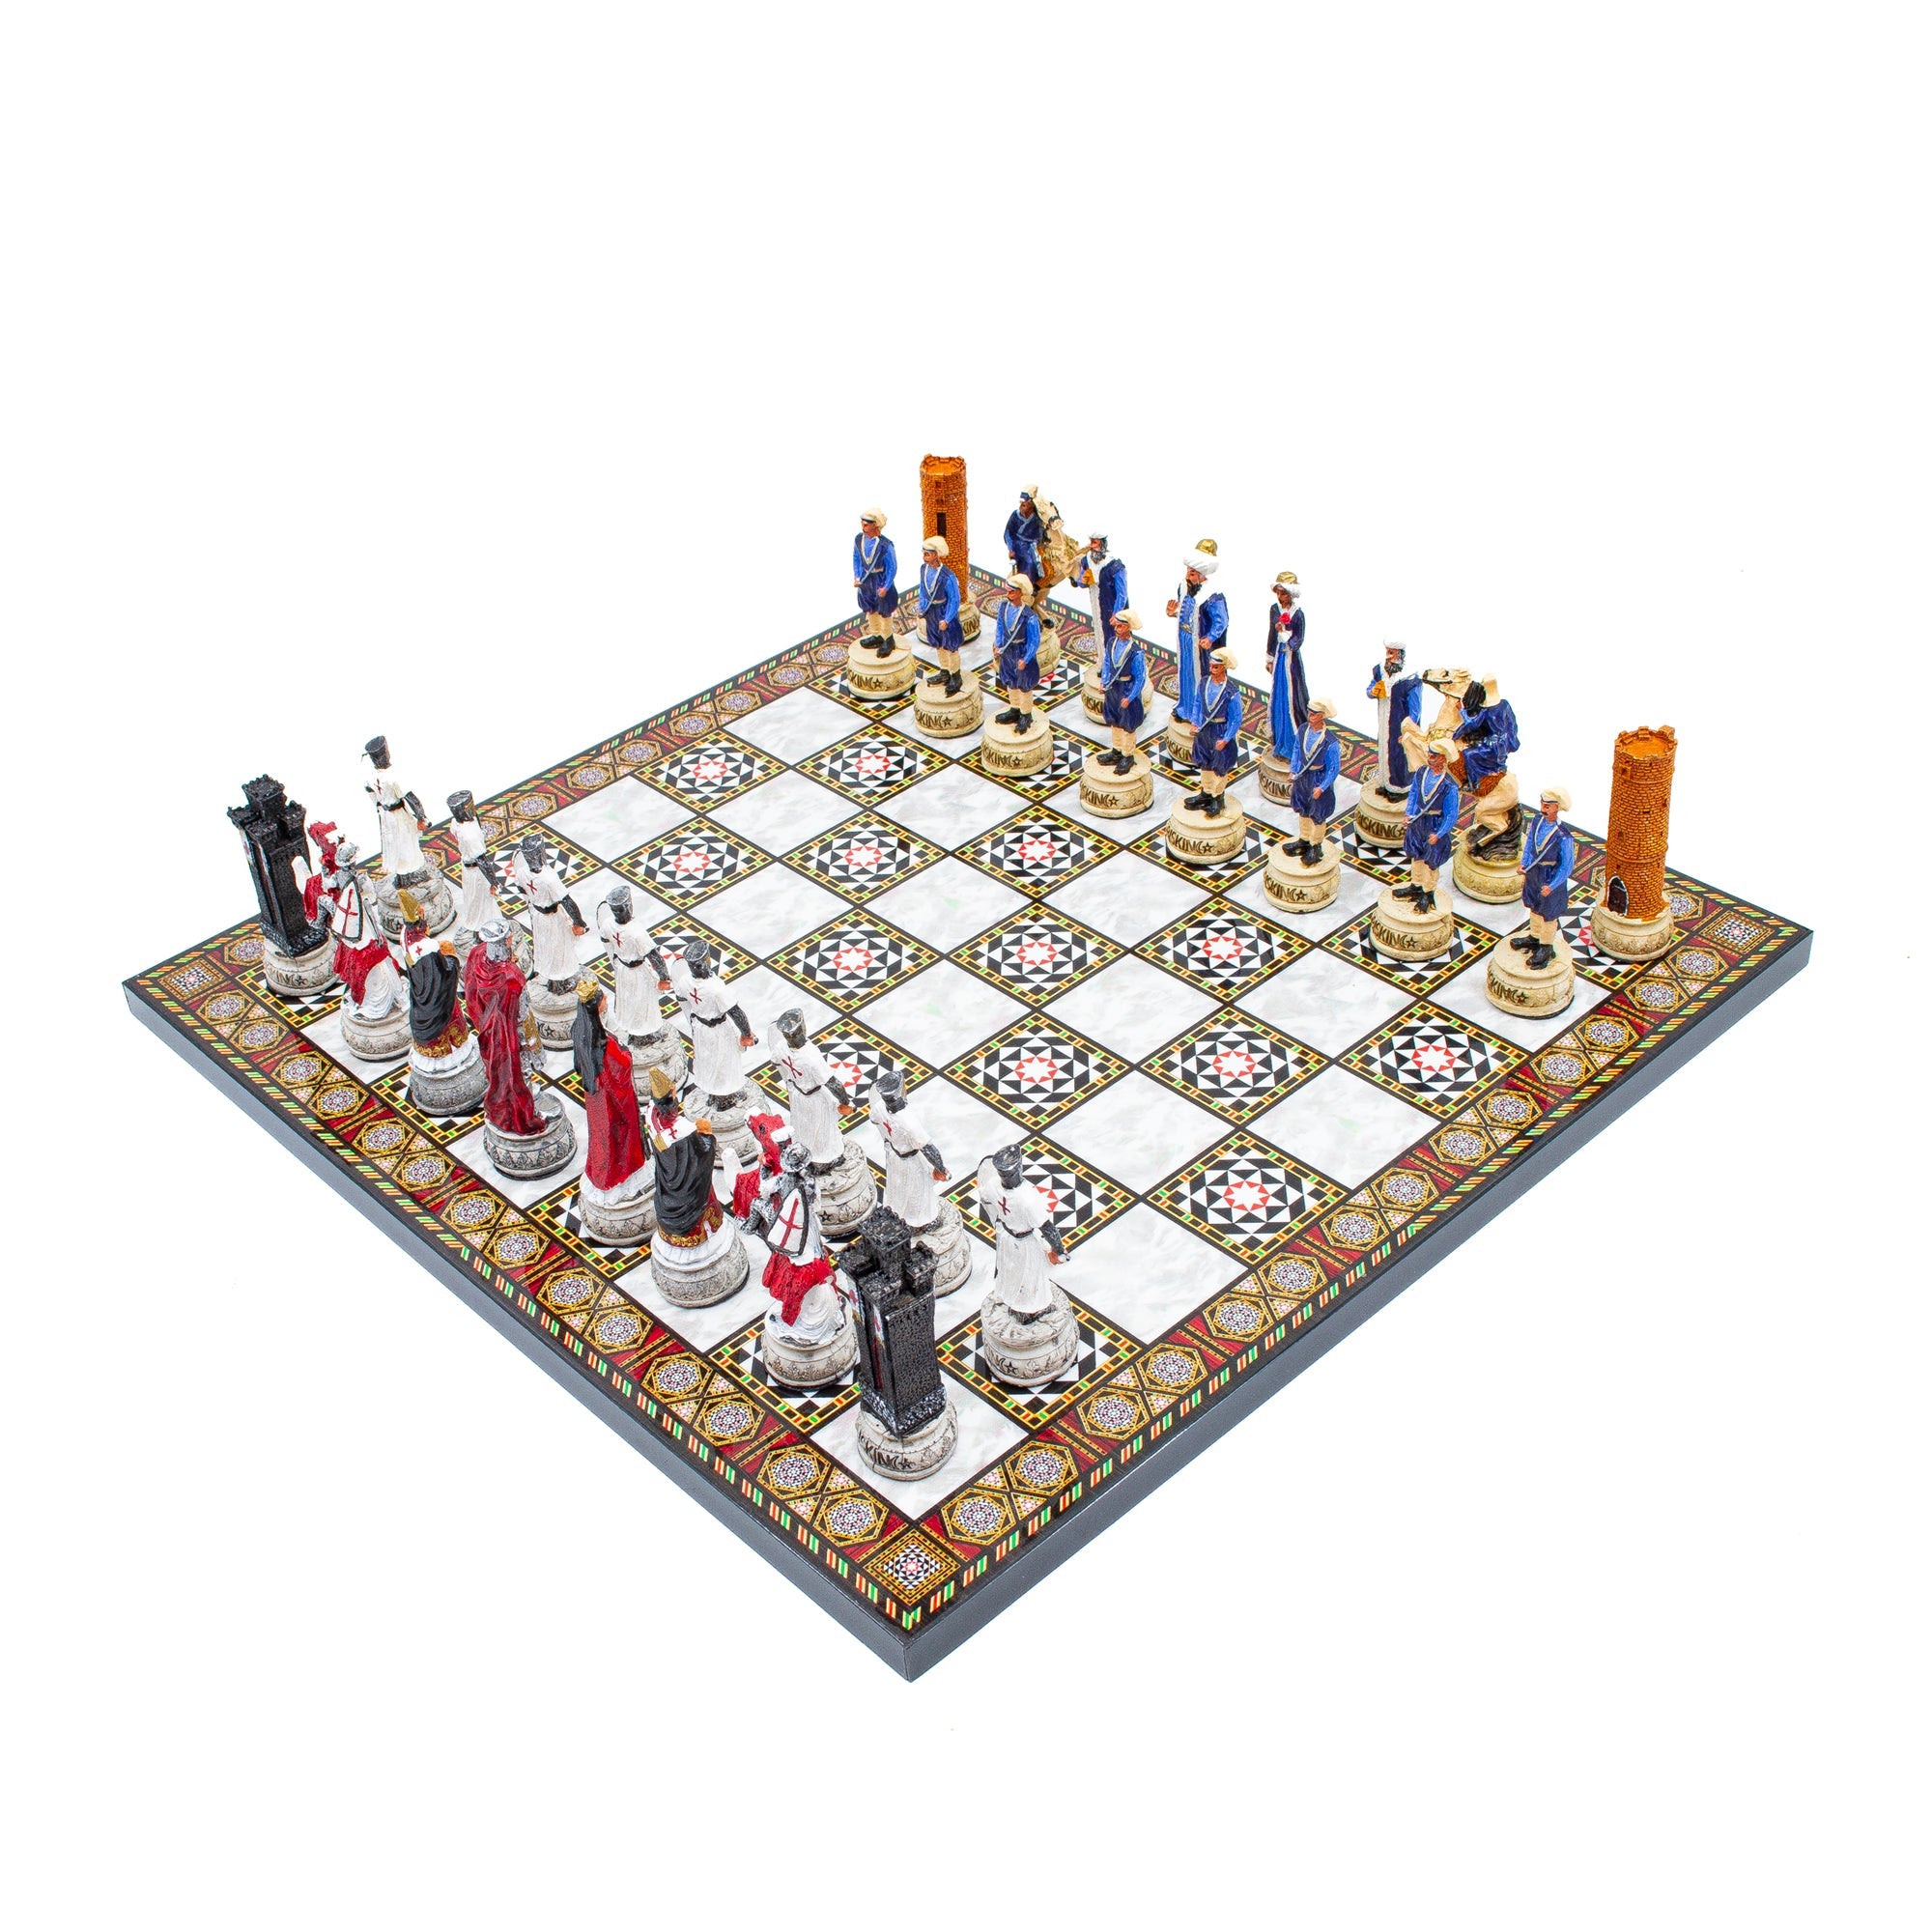 Themed Chess Sets: Where Imagination Meets Strategy${shop-name}